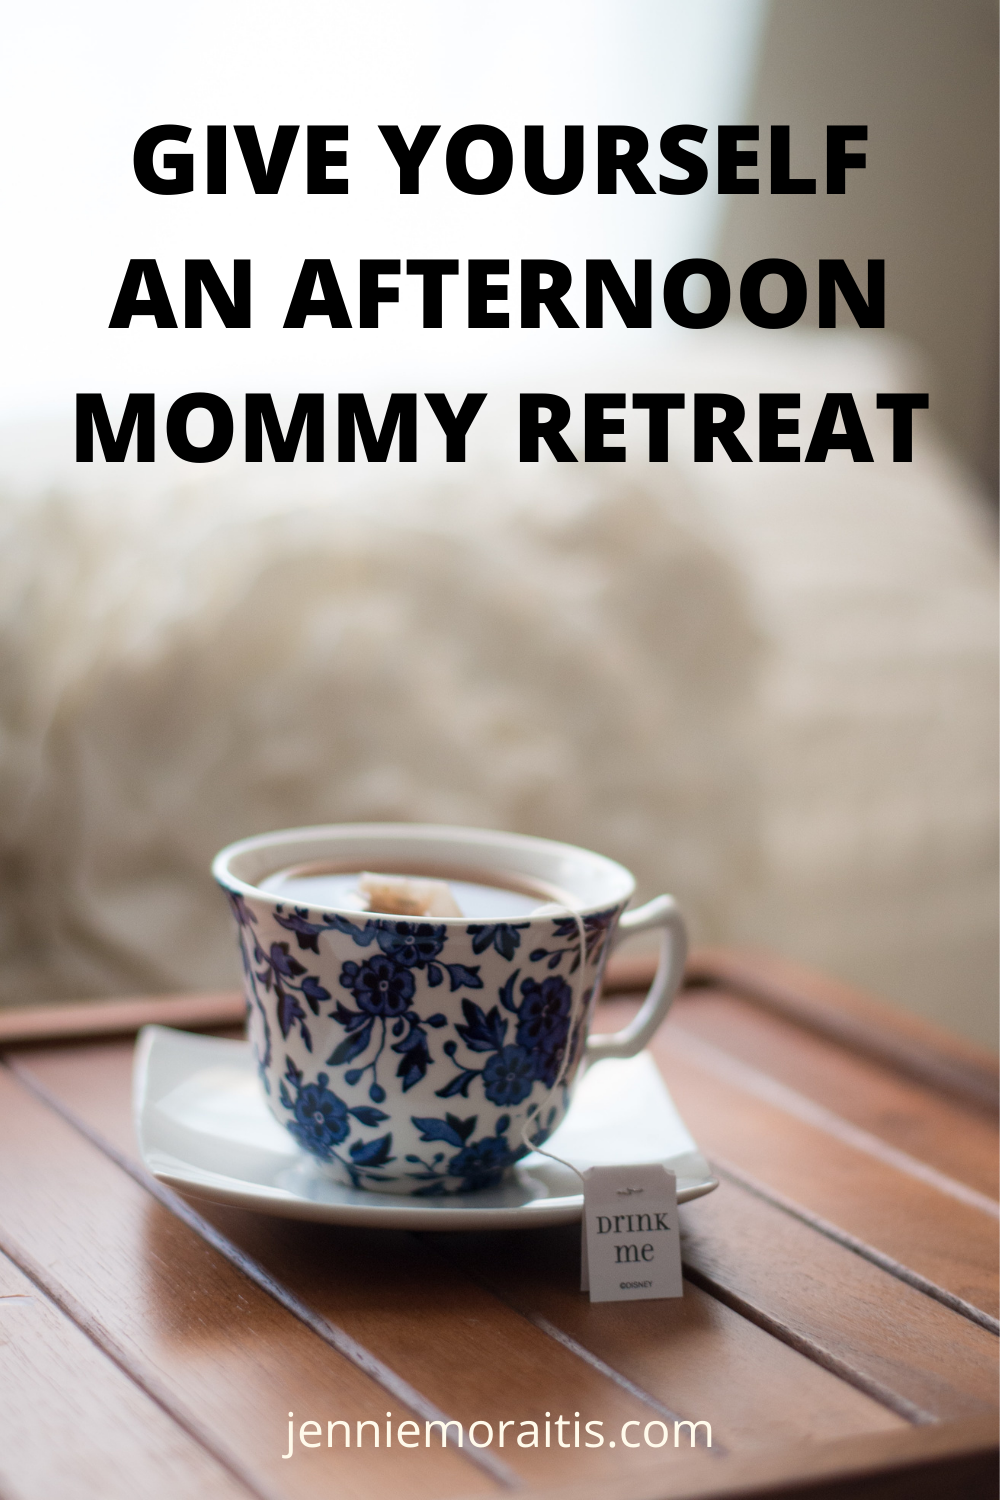 Give Yourself an Afternoon Mommy Retreat